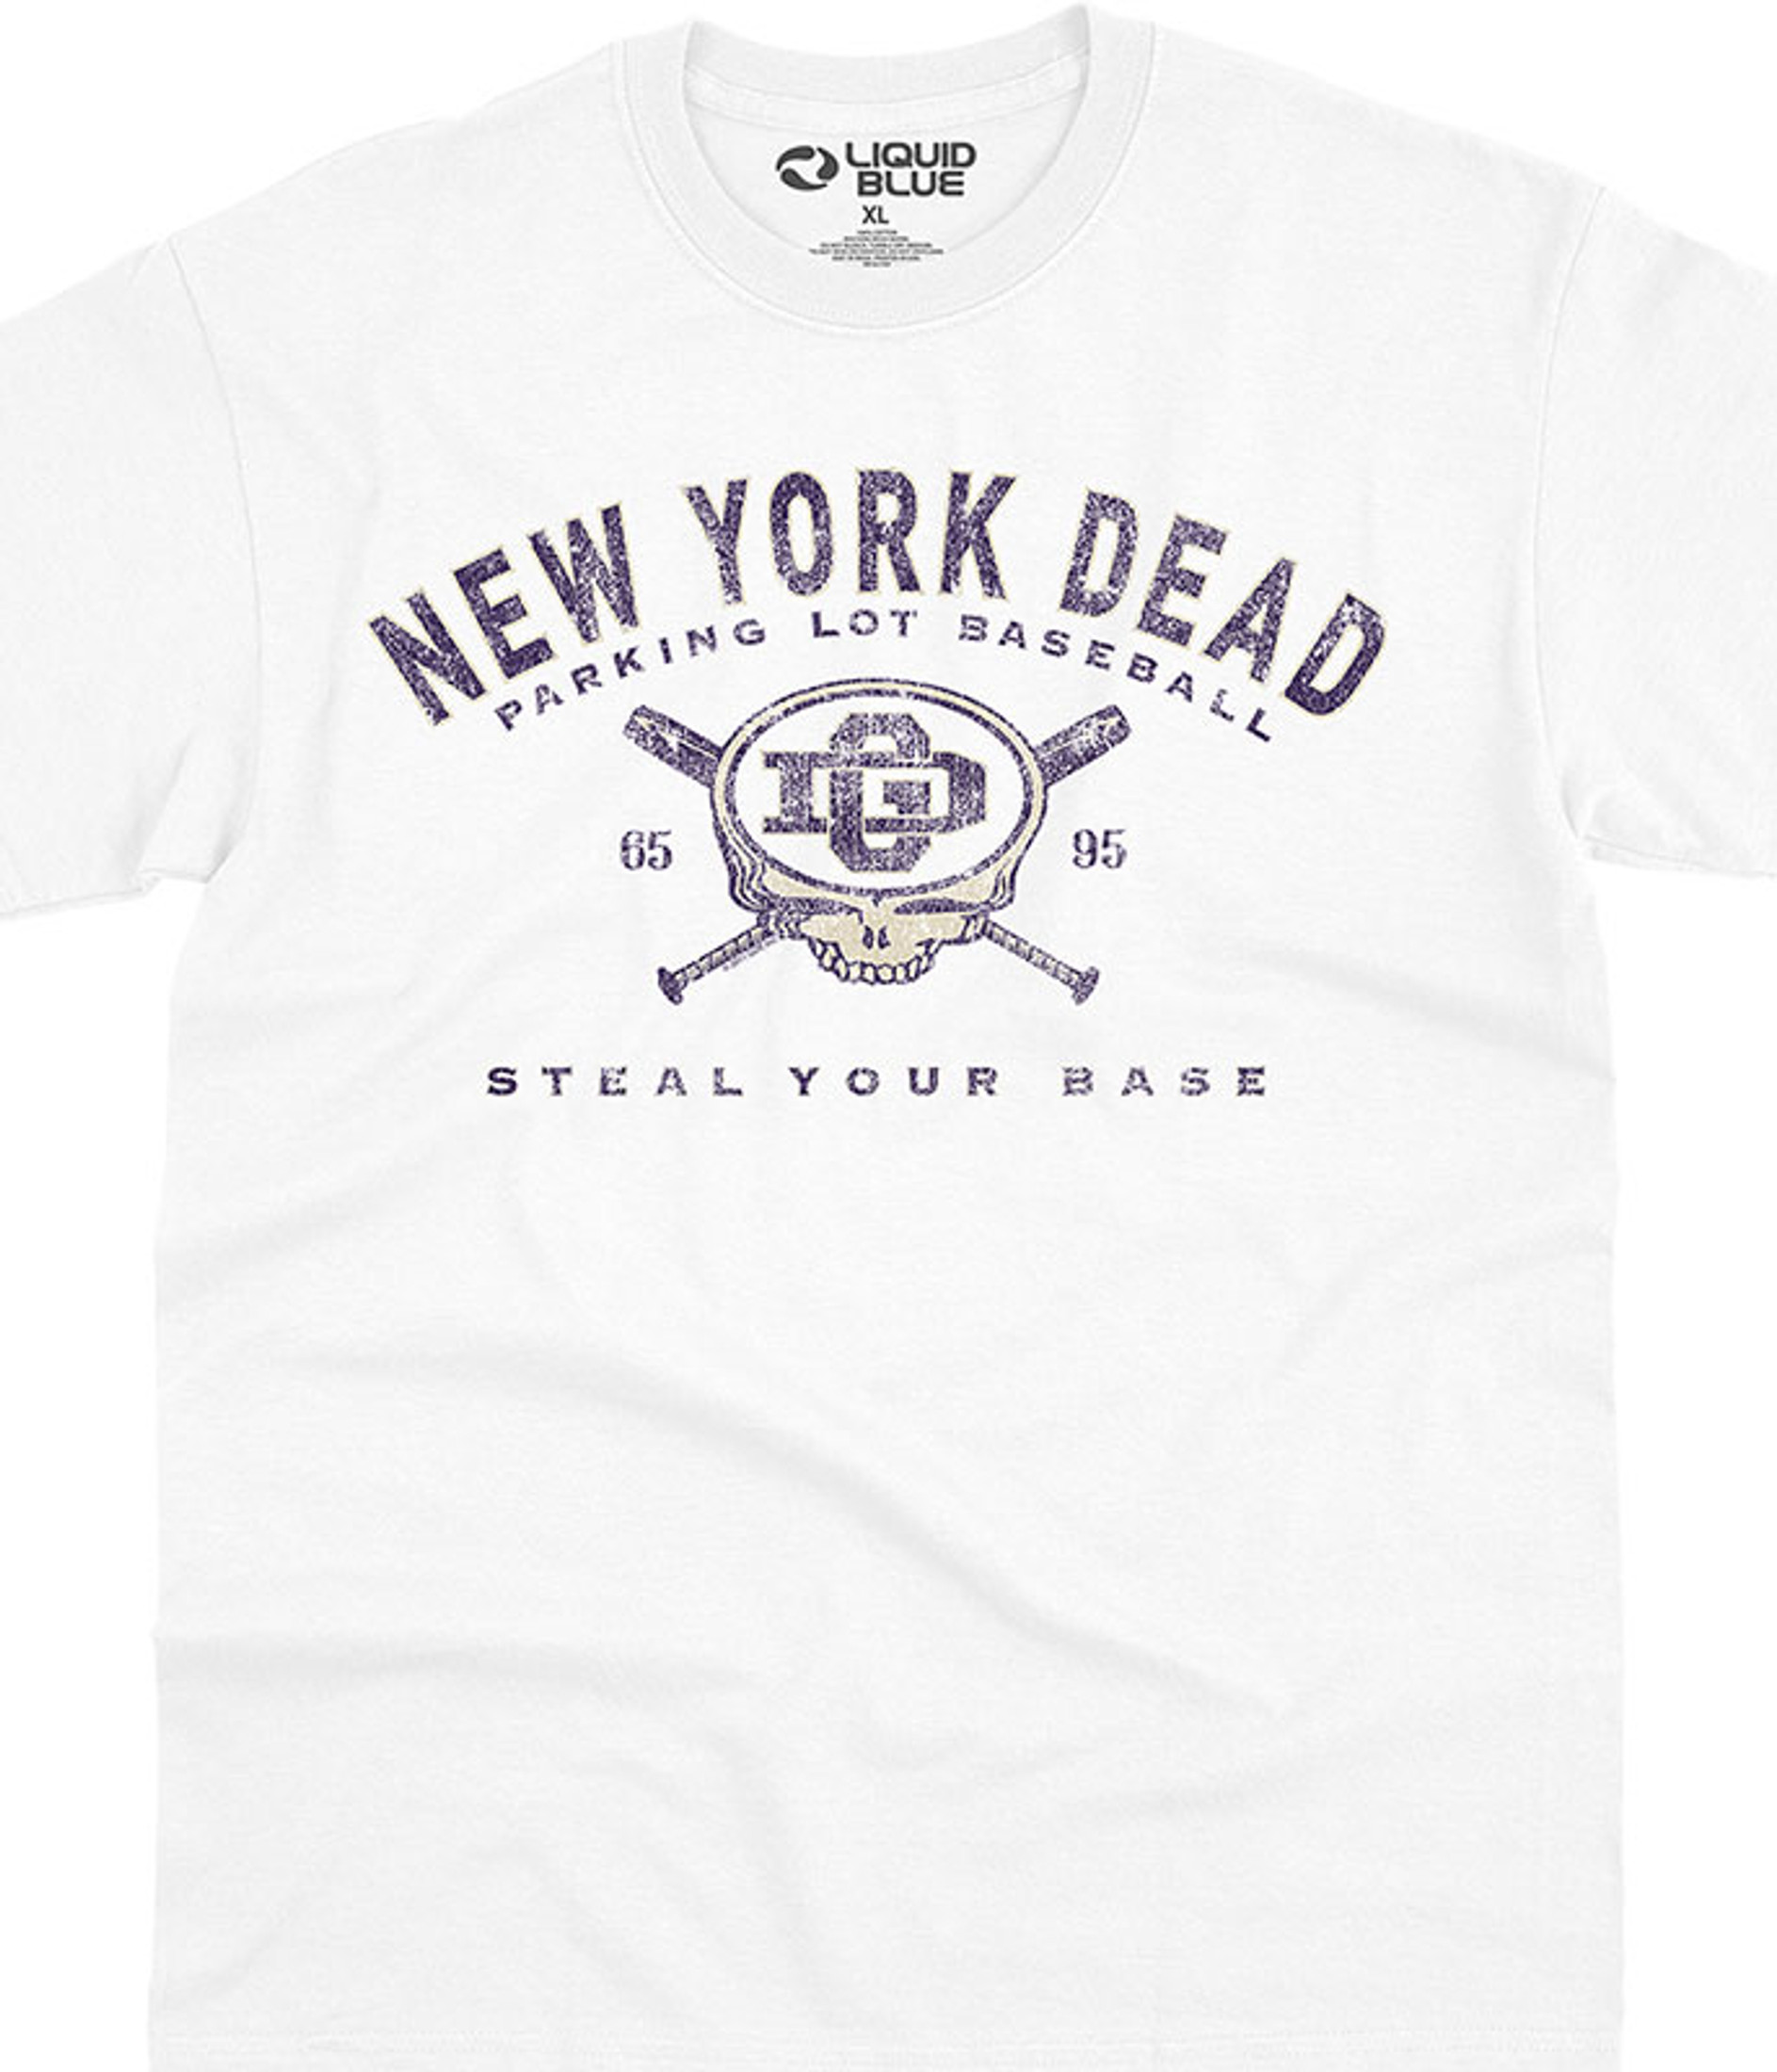 New York Yankees Grateful Dead Steal Your Base Shirt - Bring Your